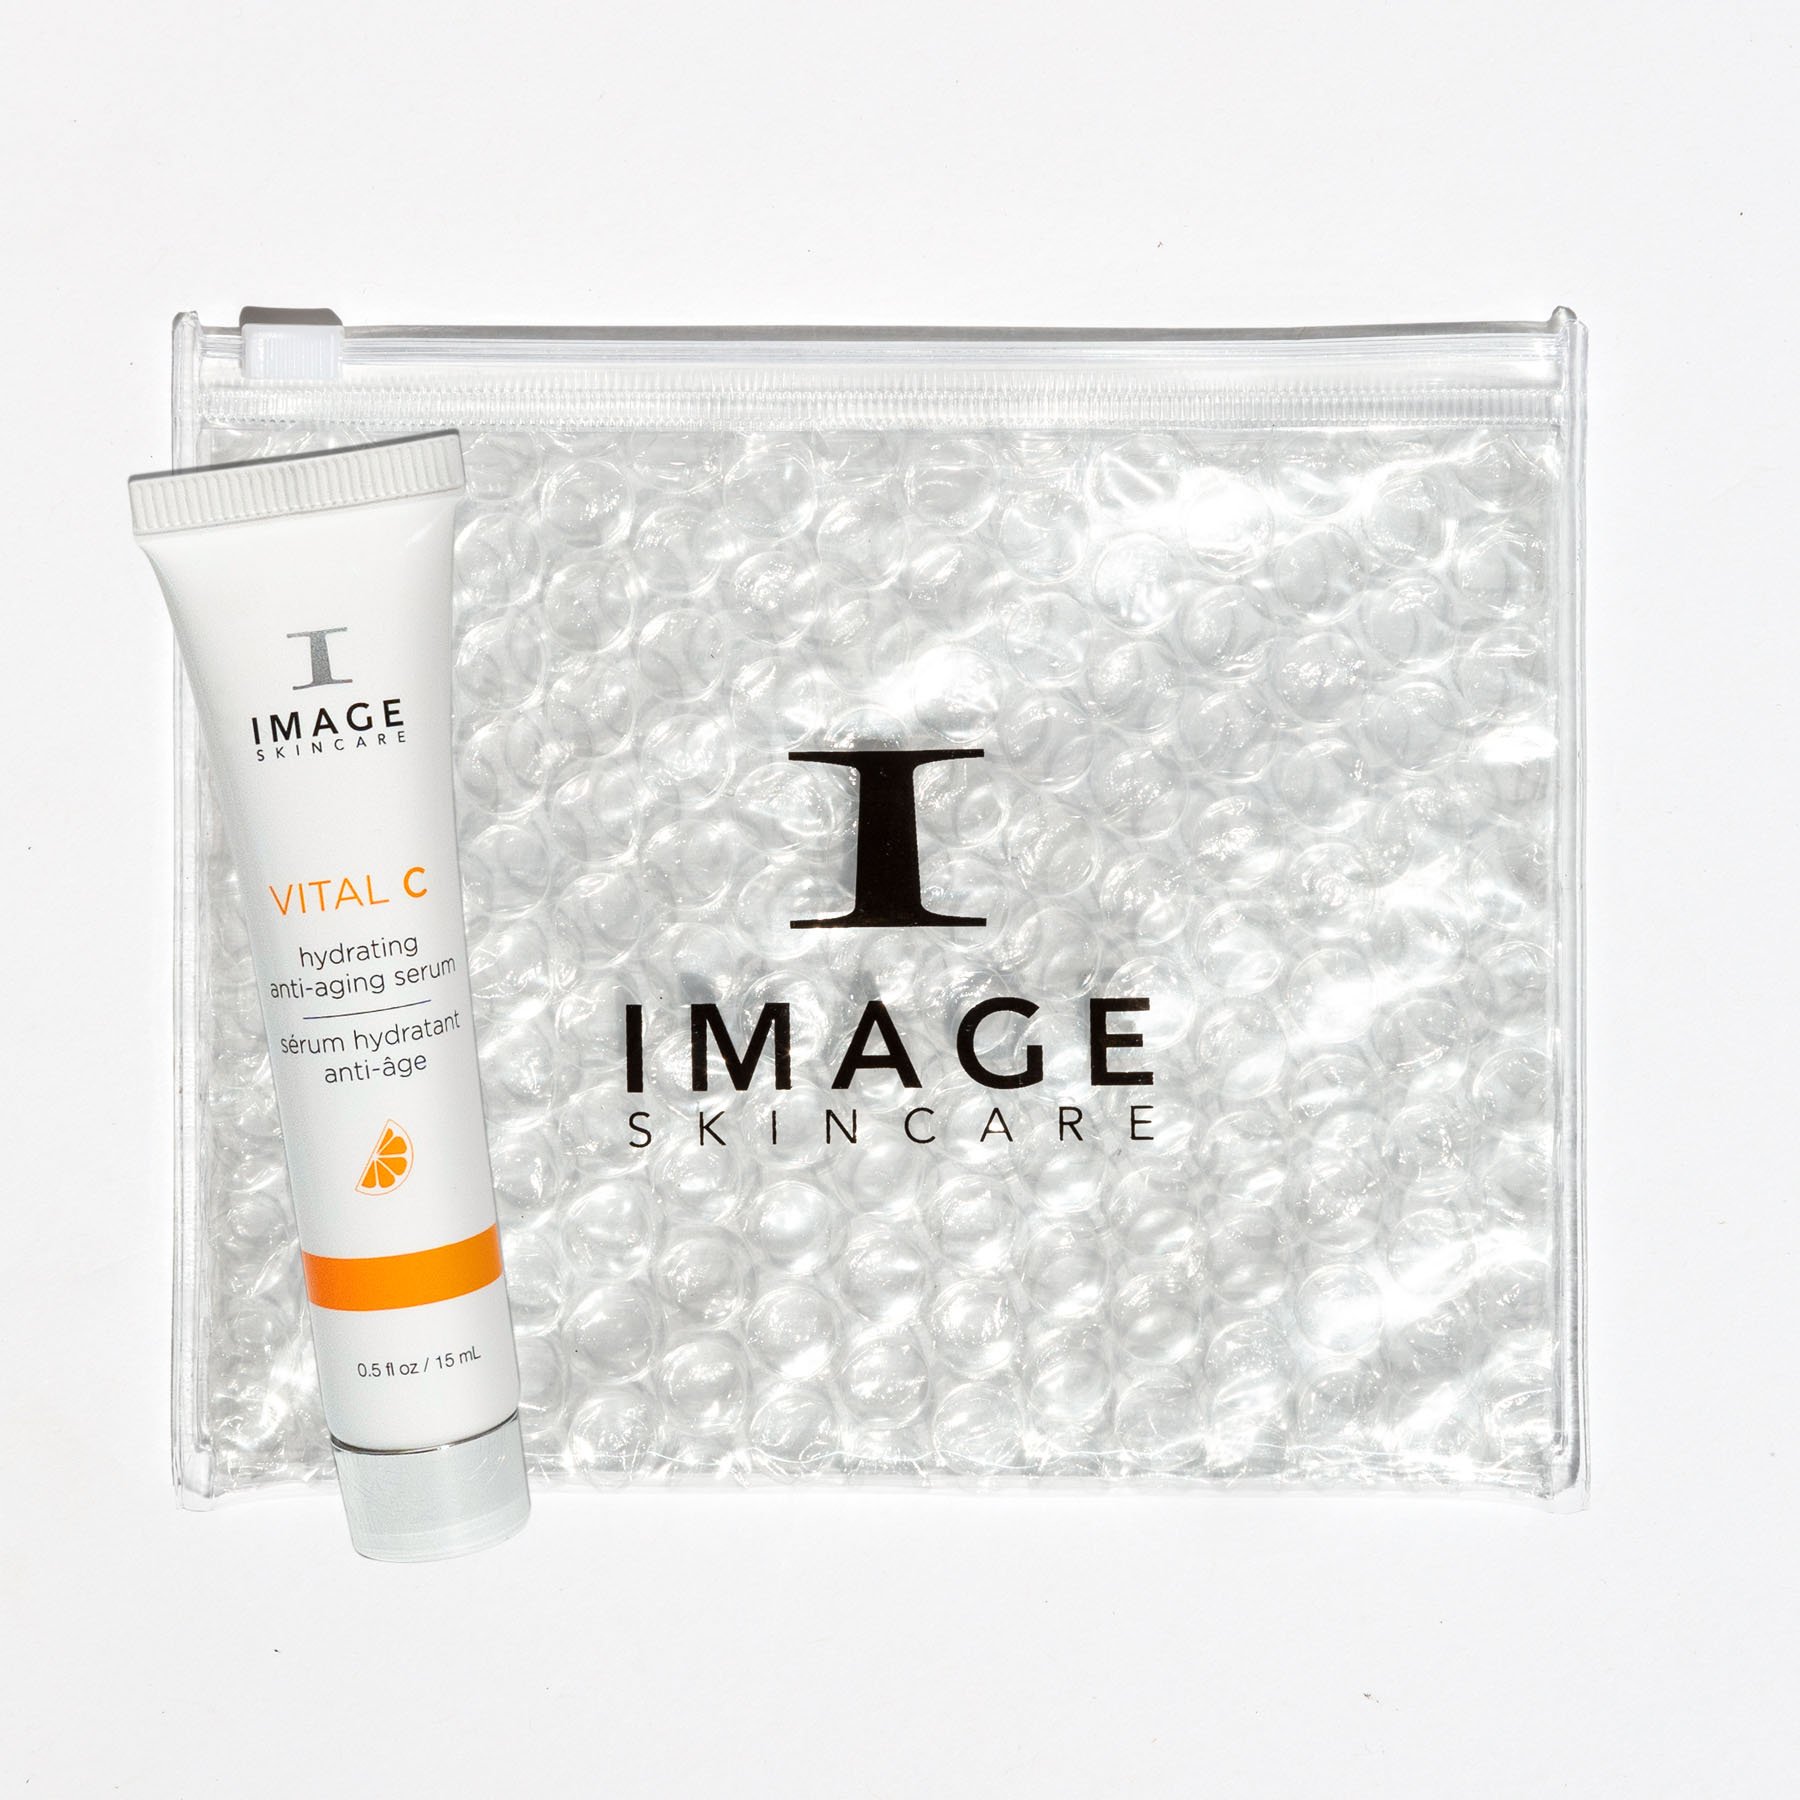 VITAL C Discovery-Size Hydrating Anti-Aging Serum with Bubble Bag